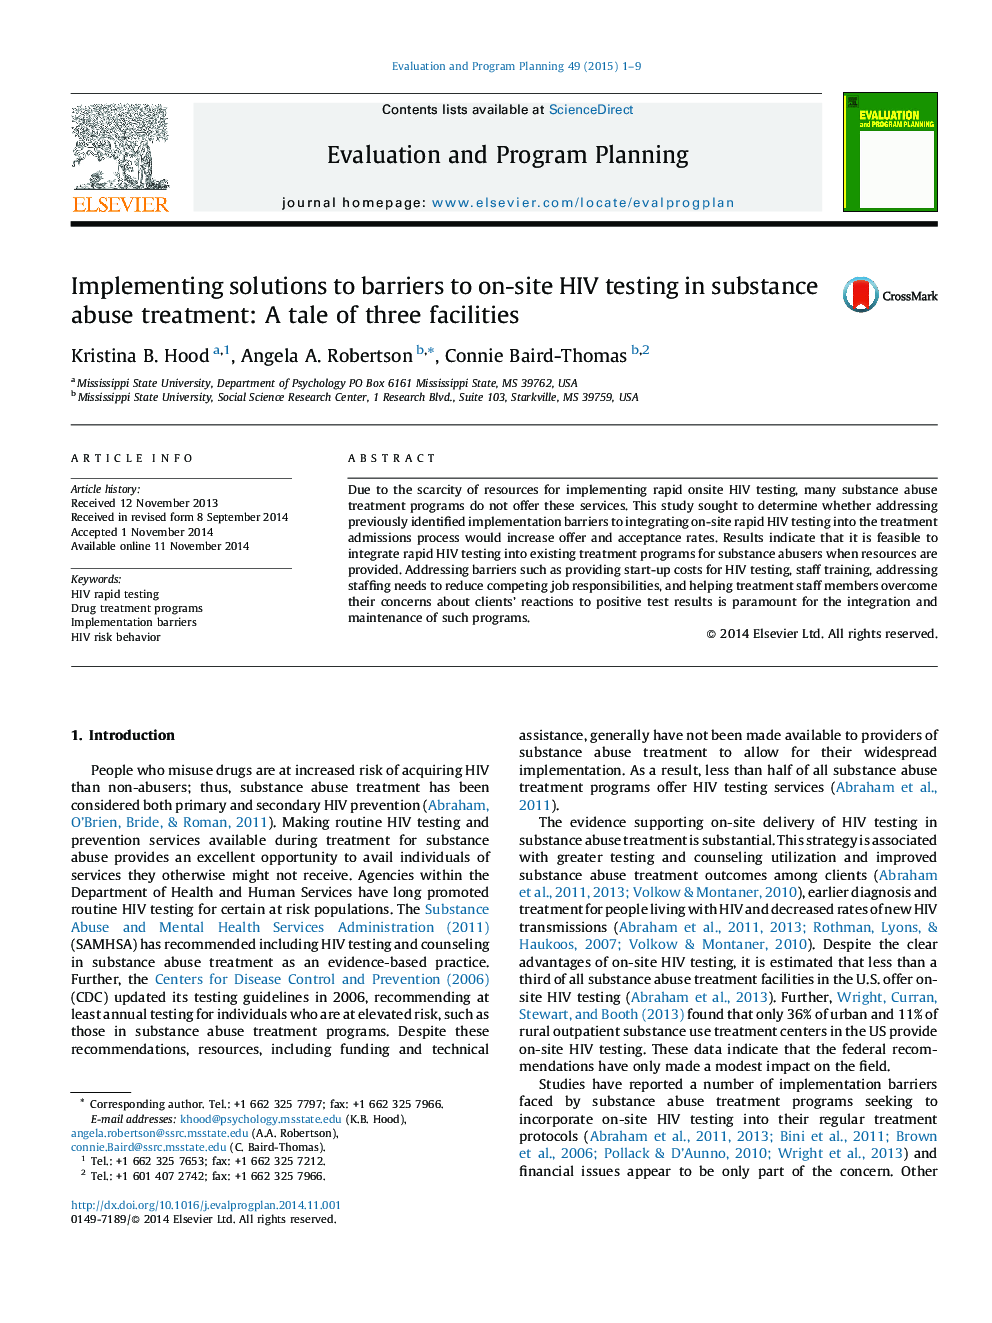 Implementing solutions to barriers to on-site HIV testing in substance abuse treatment: A tale of three facilities